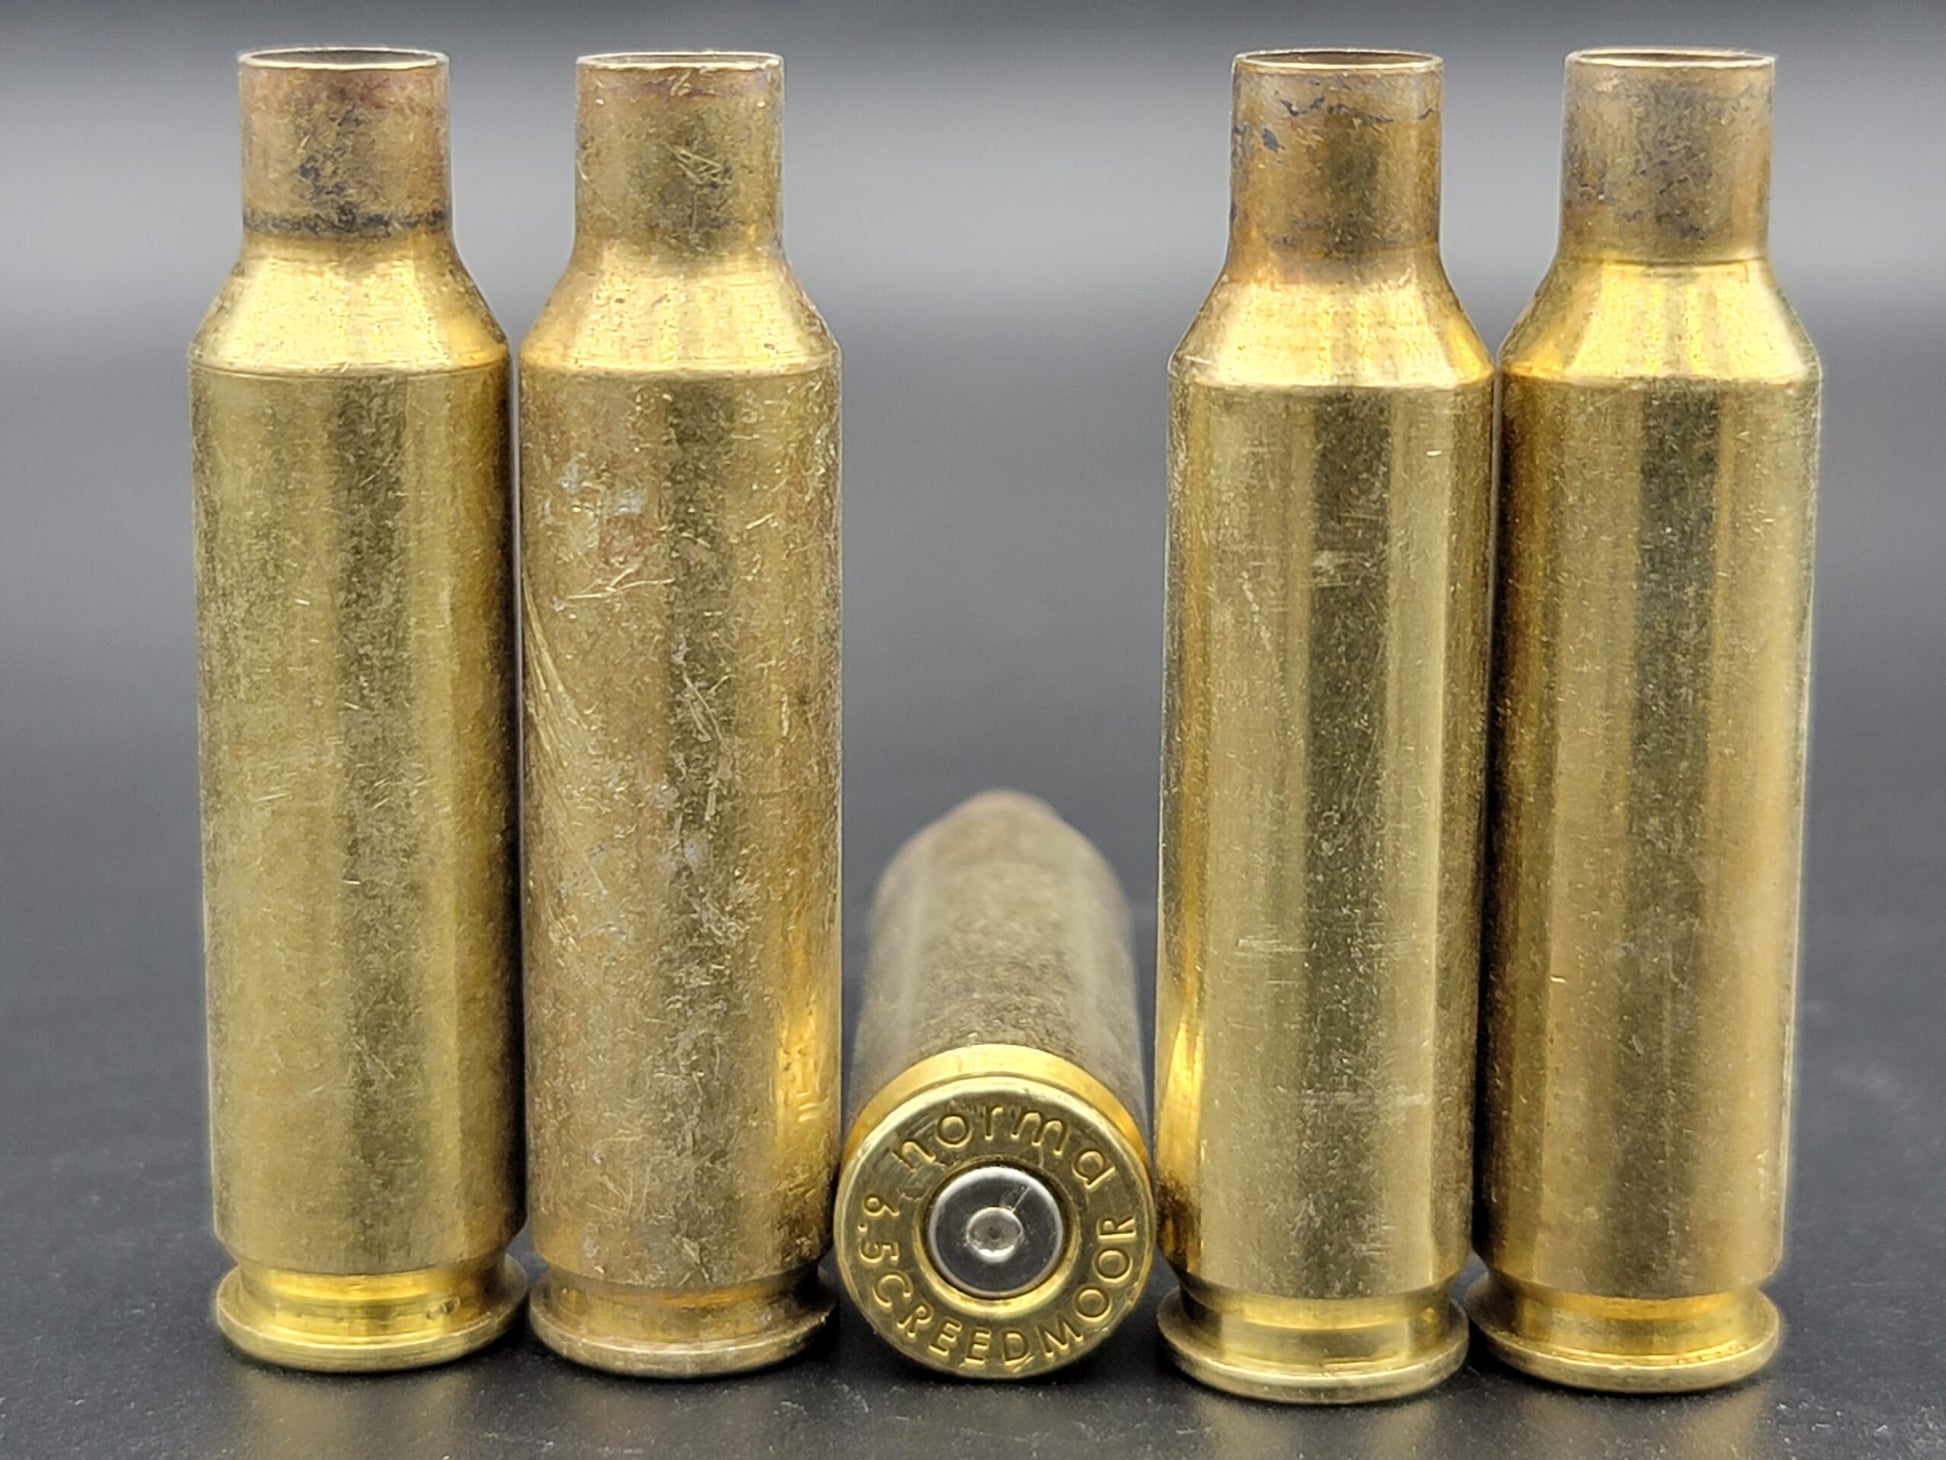 6.5 Creedmoor once fired rifle brass. Hand sorted from reputable indoor/military ranges for reloading. Reliable spent casings for precision shooting.